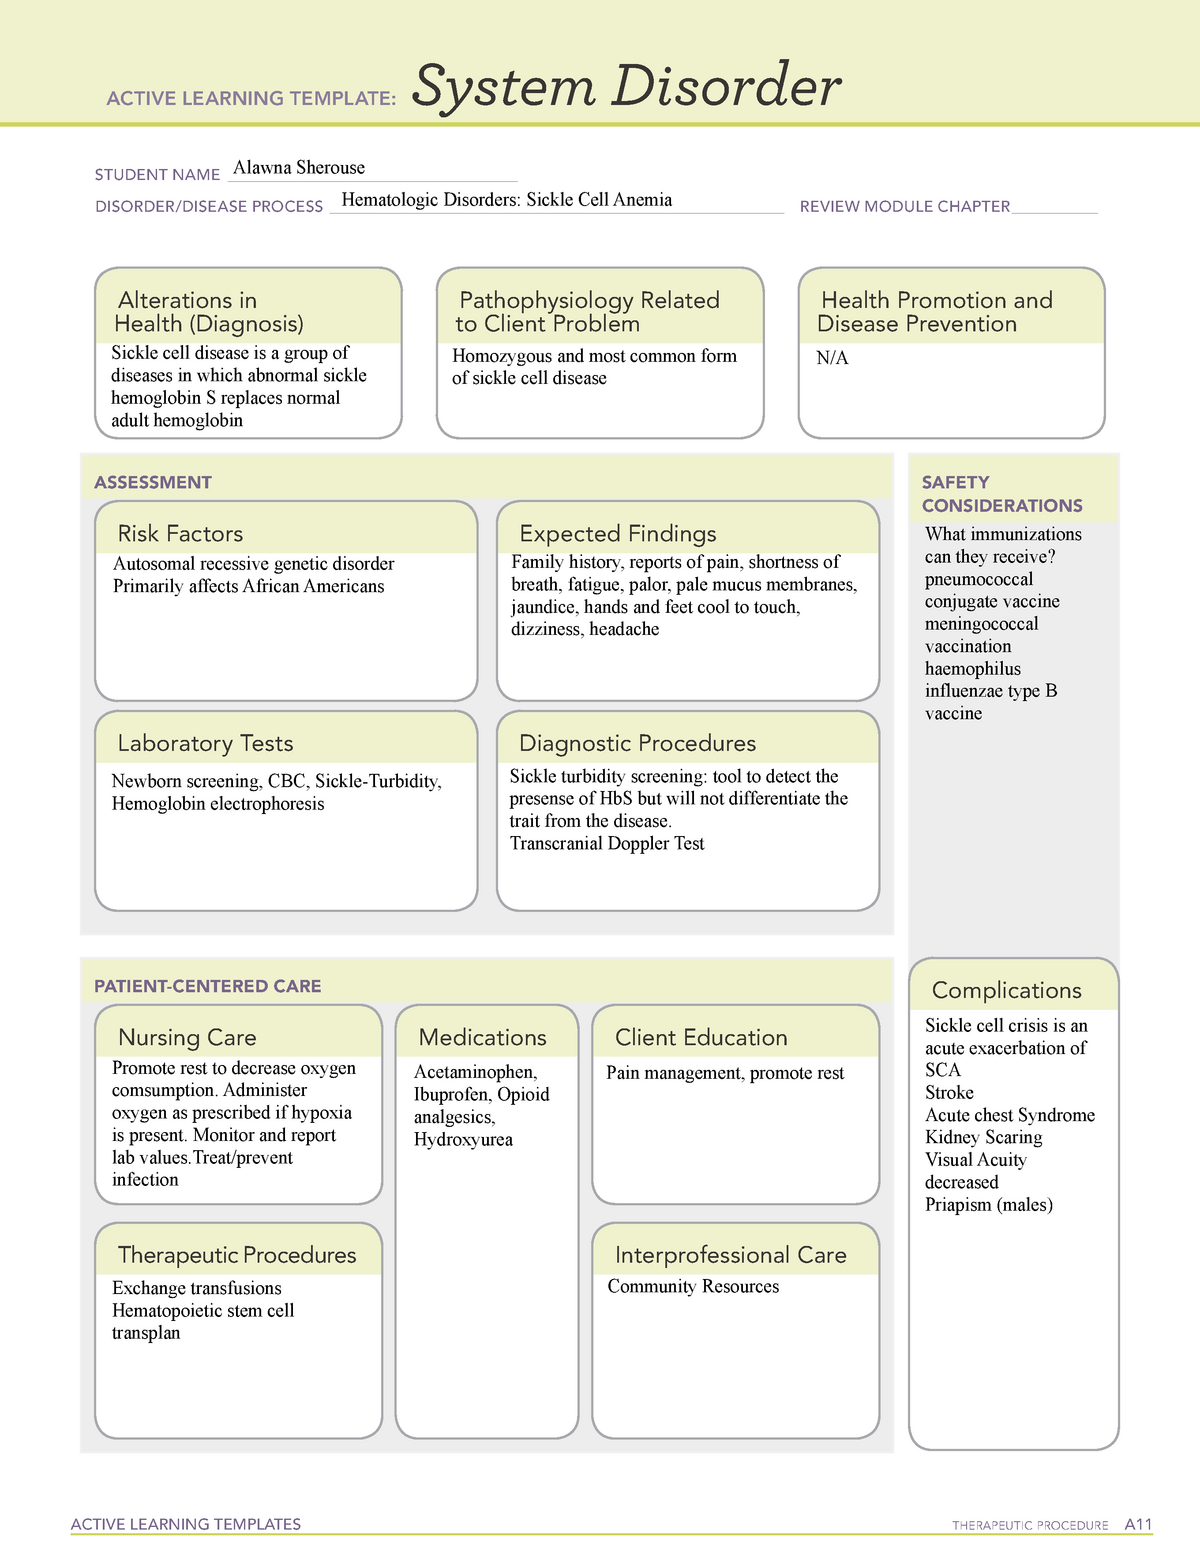 Active Learning Template system Dis 4 ACTIVE LEARNING TEMPLATES